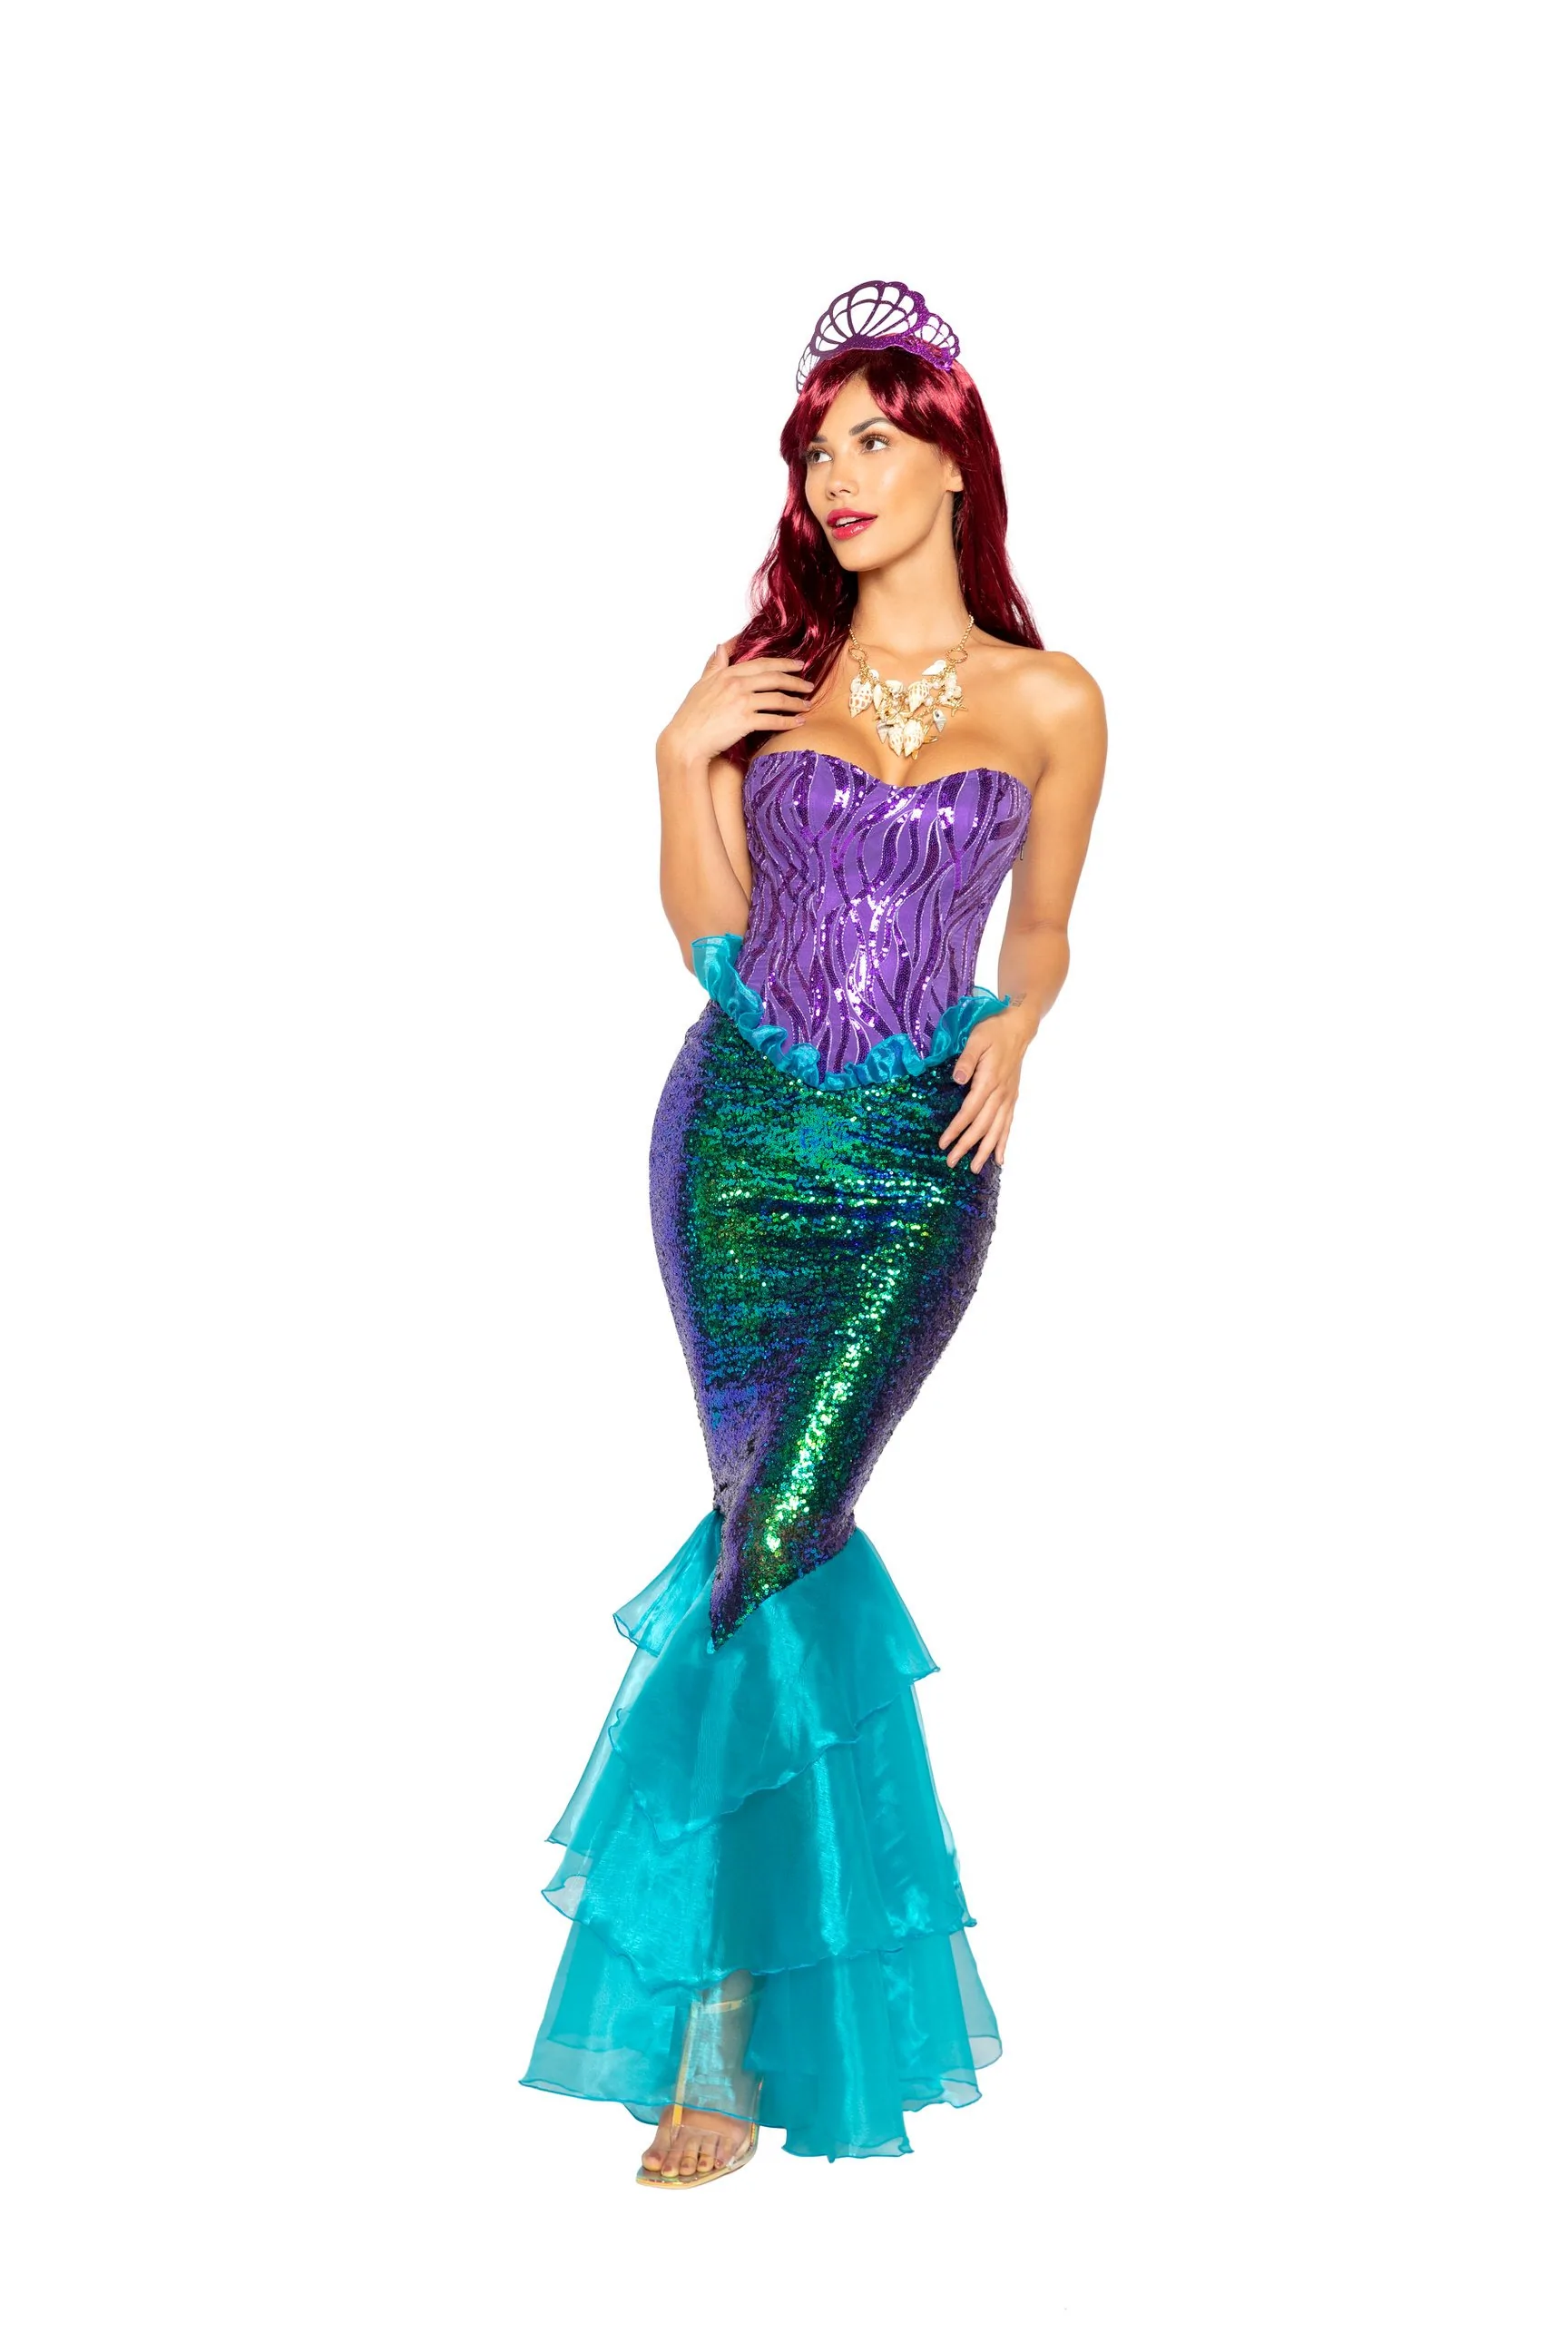 3PC Majestic Mermaid Costume for Adults